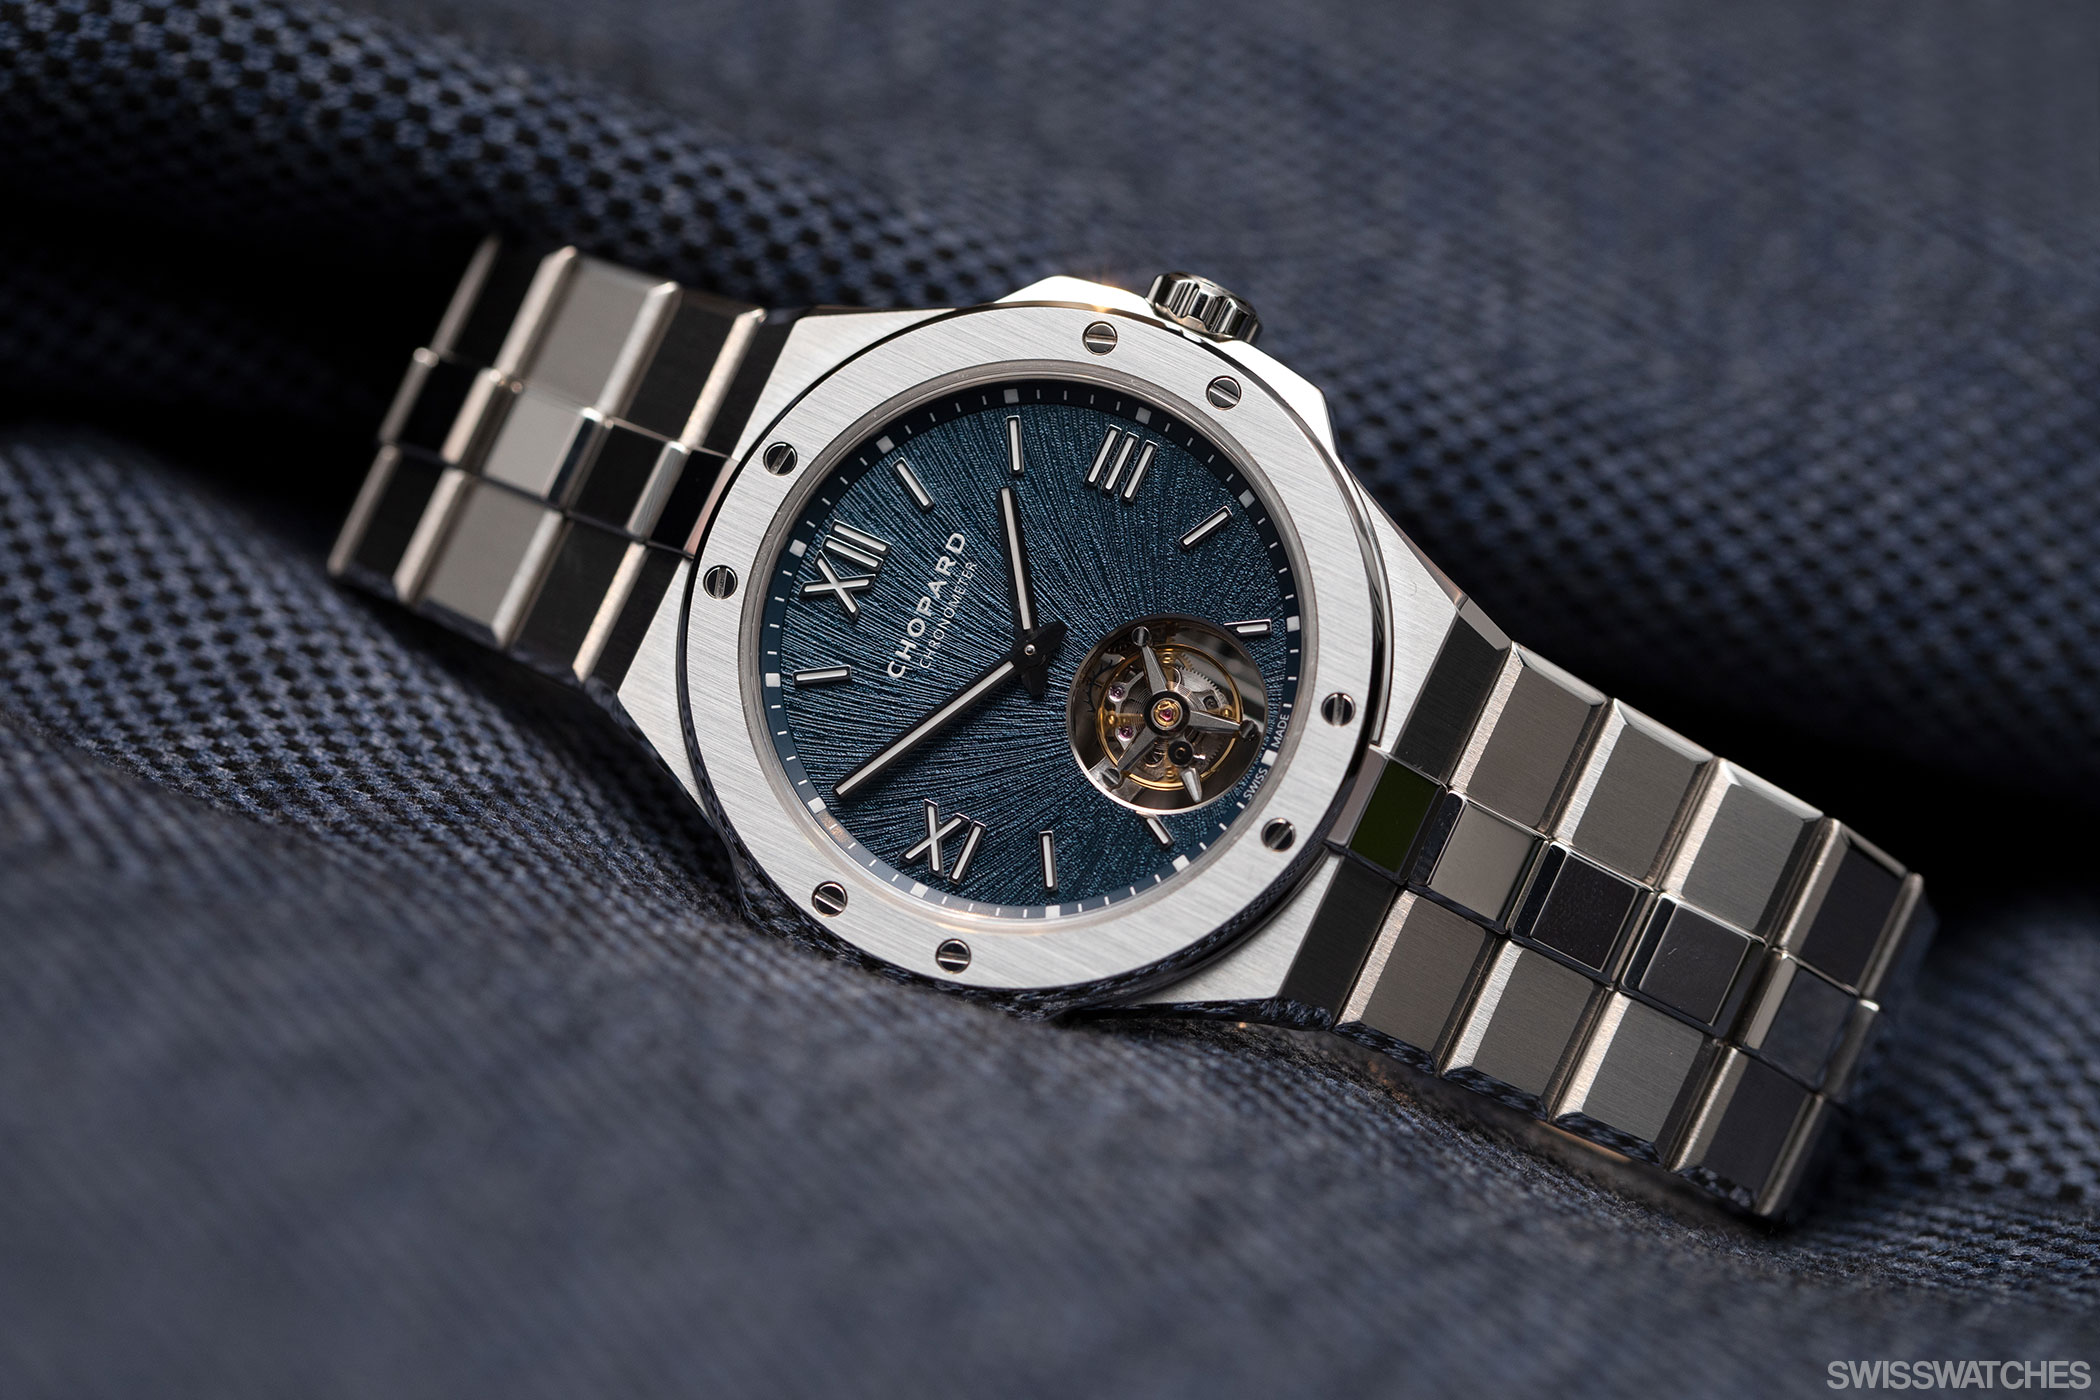 Chopard Alpine Eagle Stainless Steel Sport Watches: Price, Specs - Bloomberg